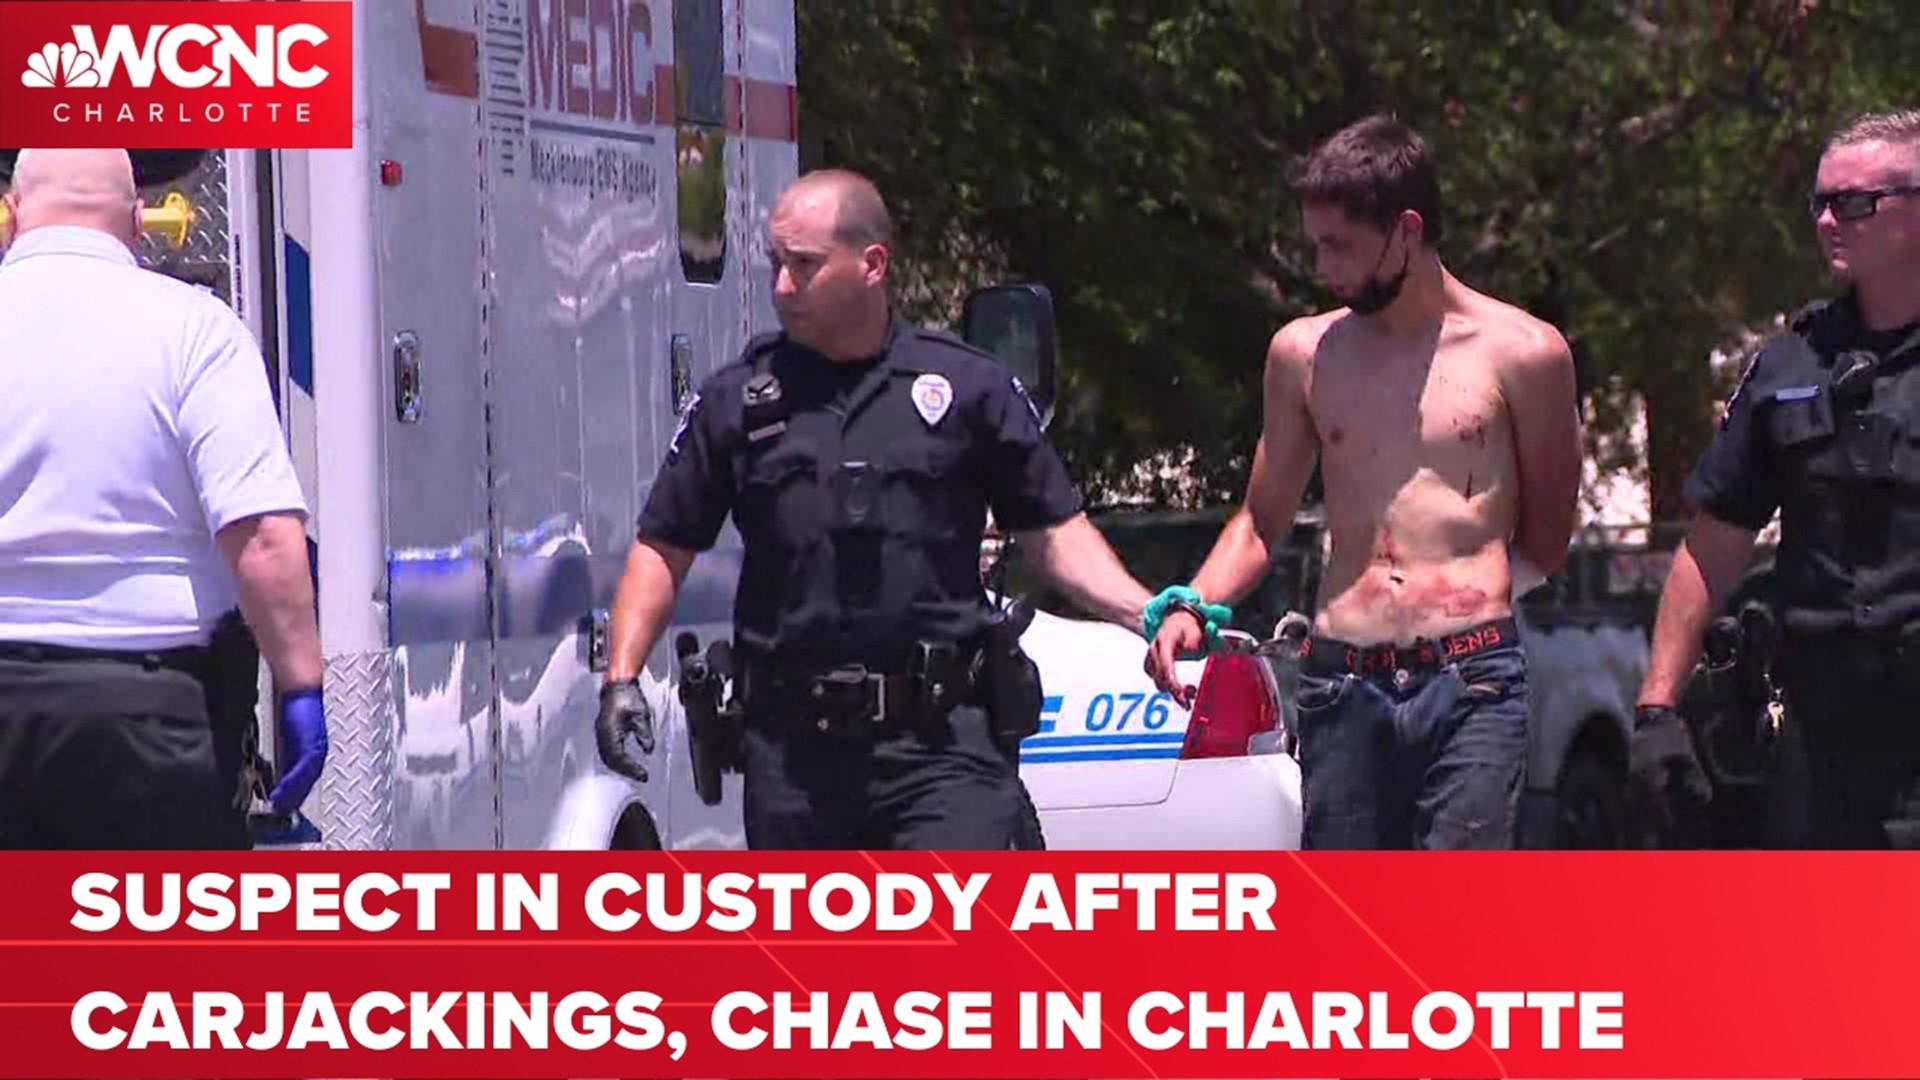 A carjacking suspect in custody after a two-hour long chase through Charlotte.